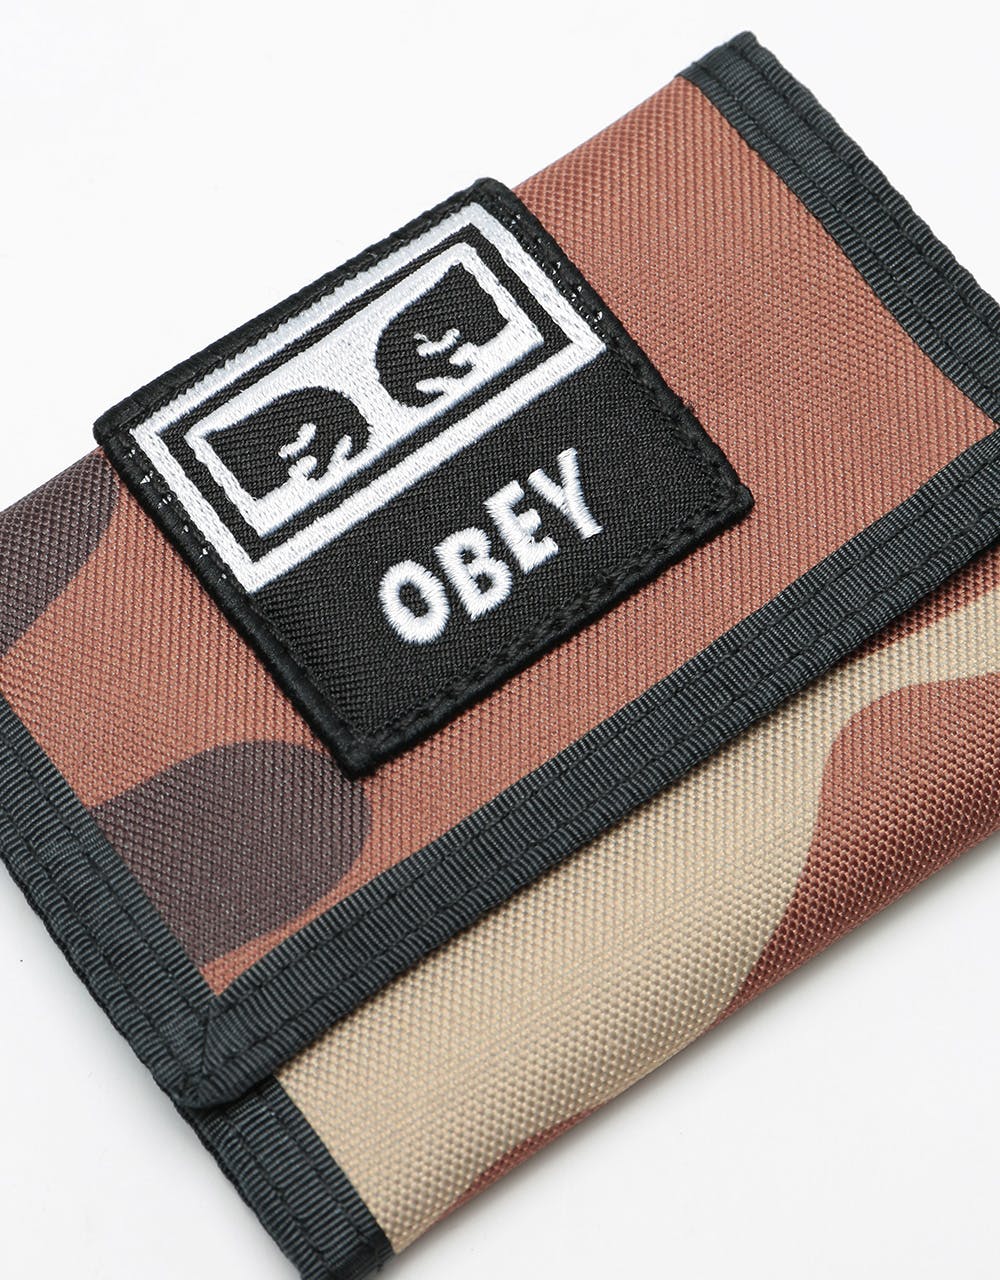 Obey Takeover Tri Fold Wallet - Field Camo